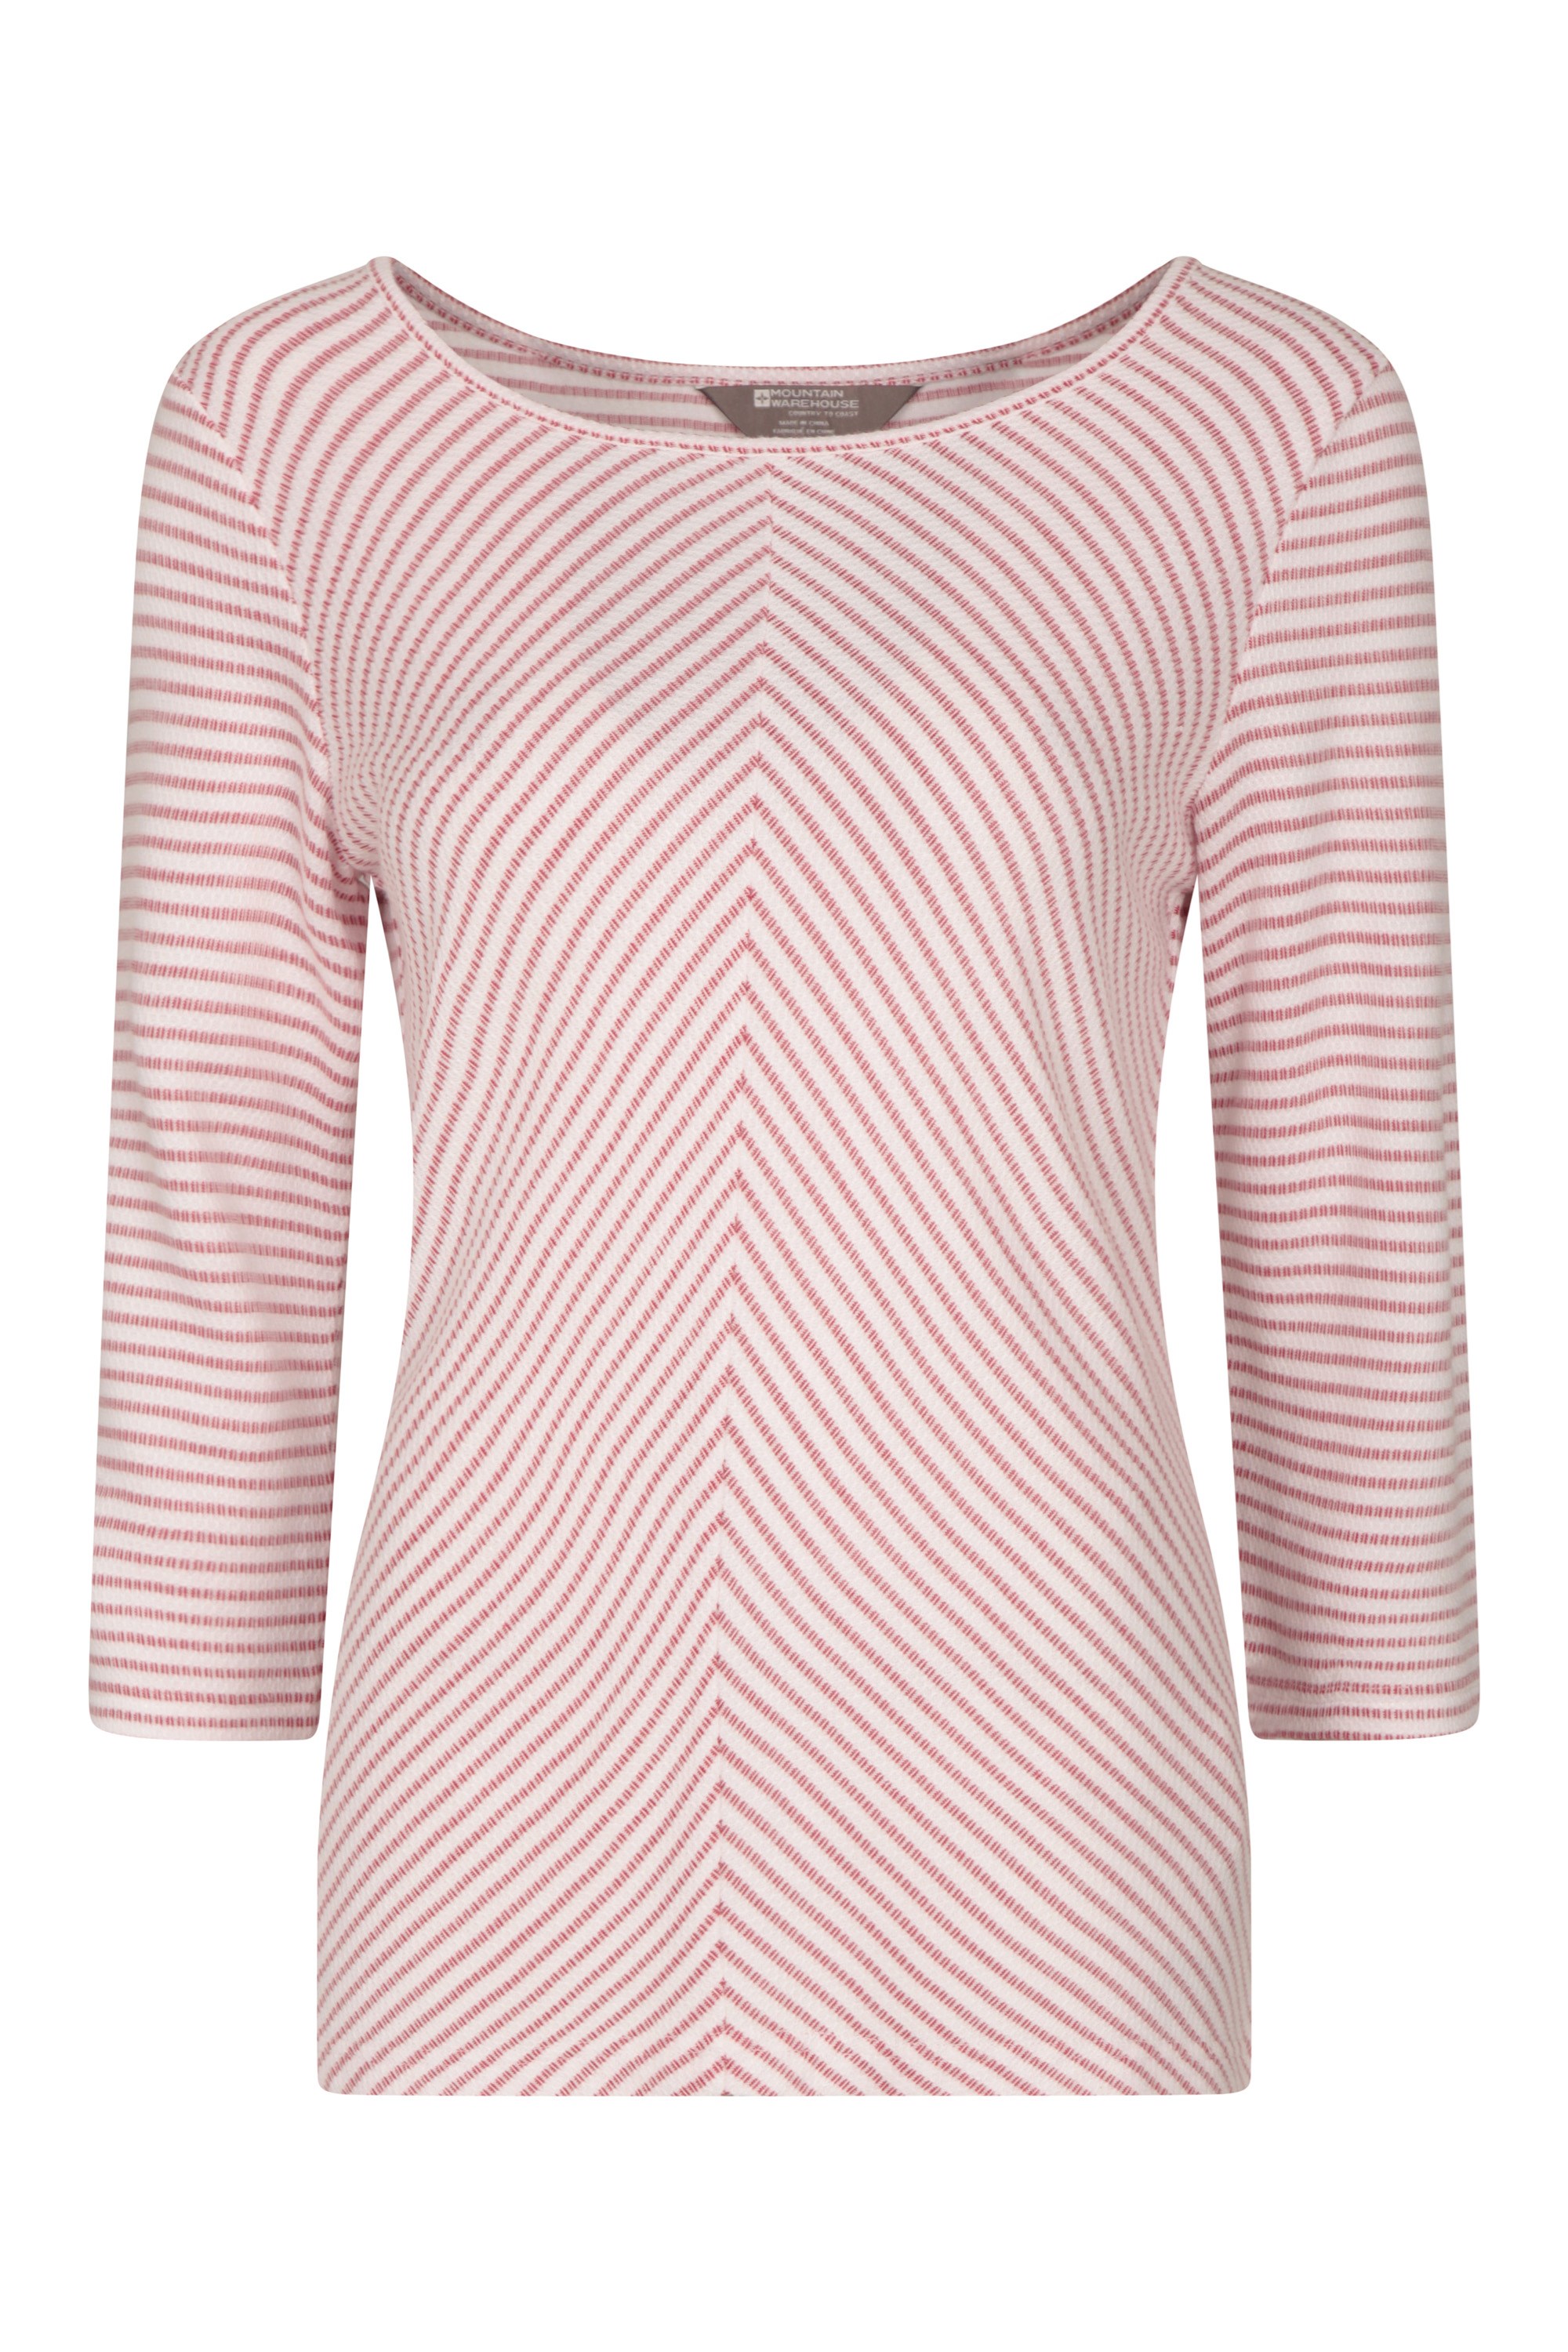 Melrose 3/4 Sleeve Stripe Knit Top - Red